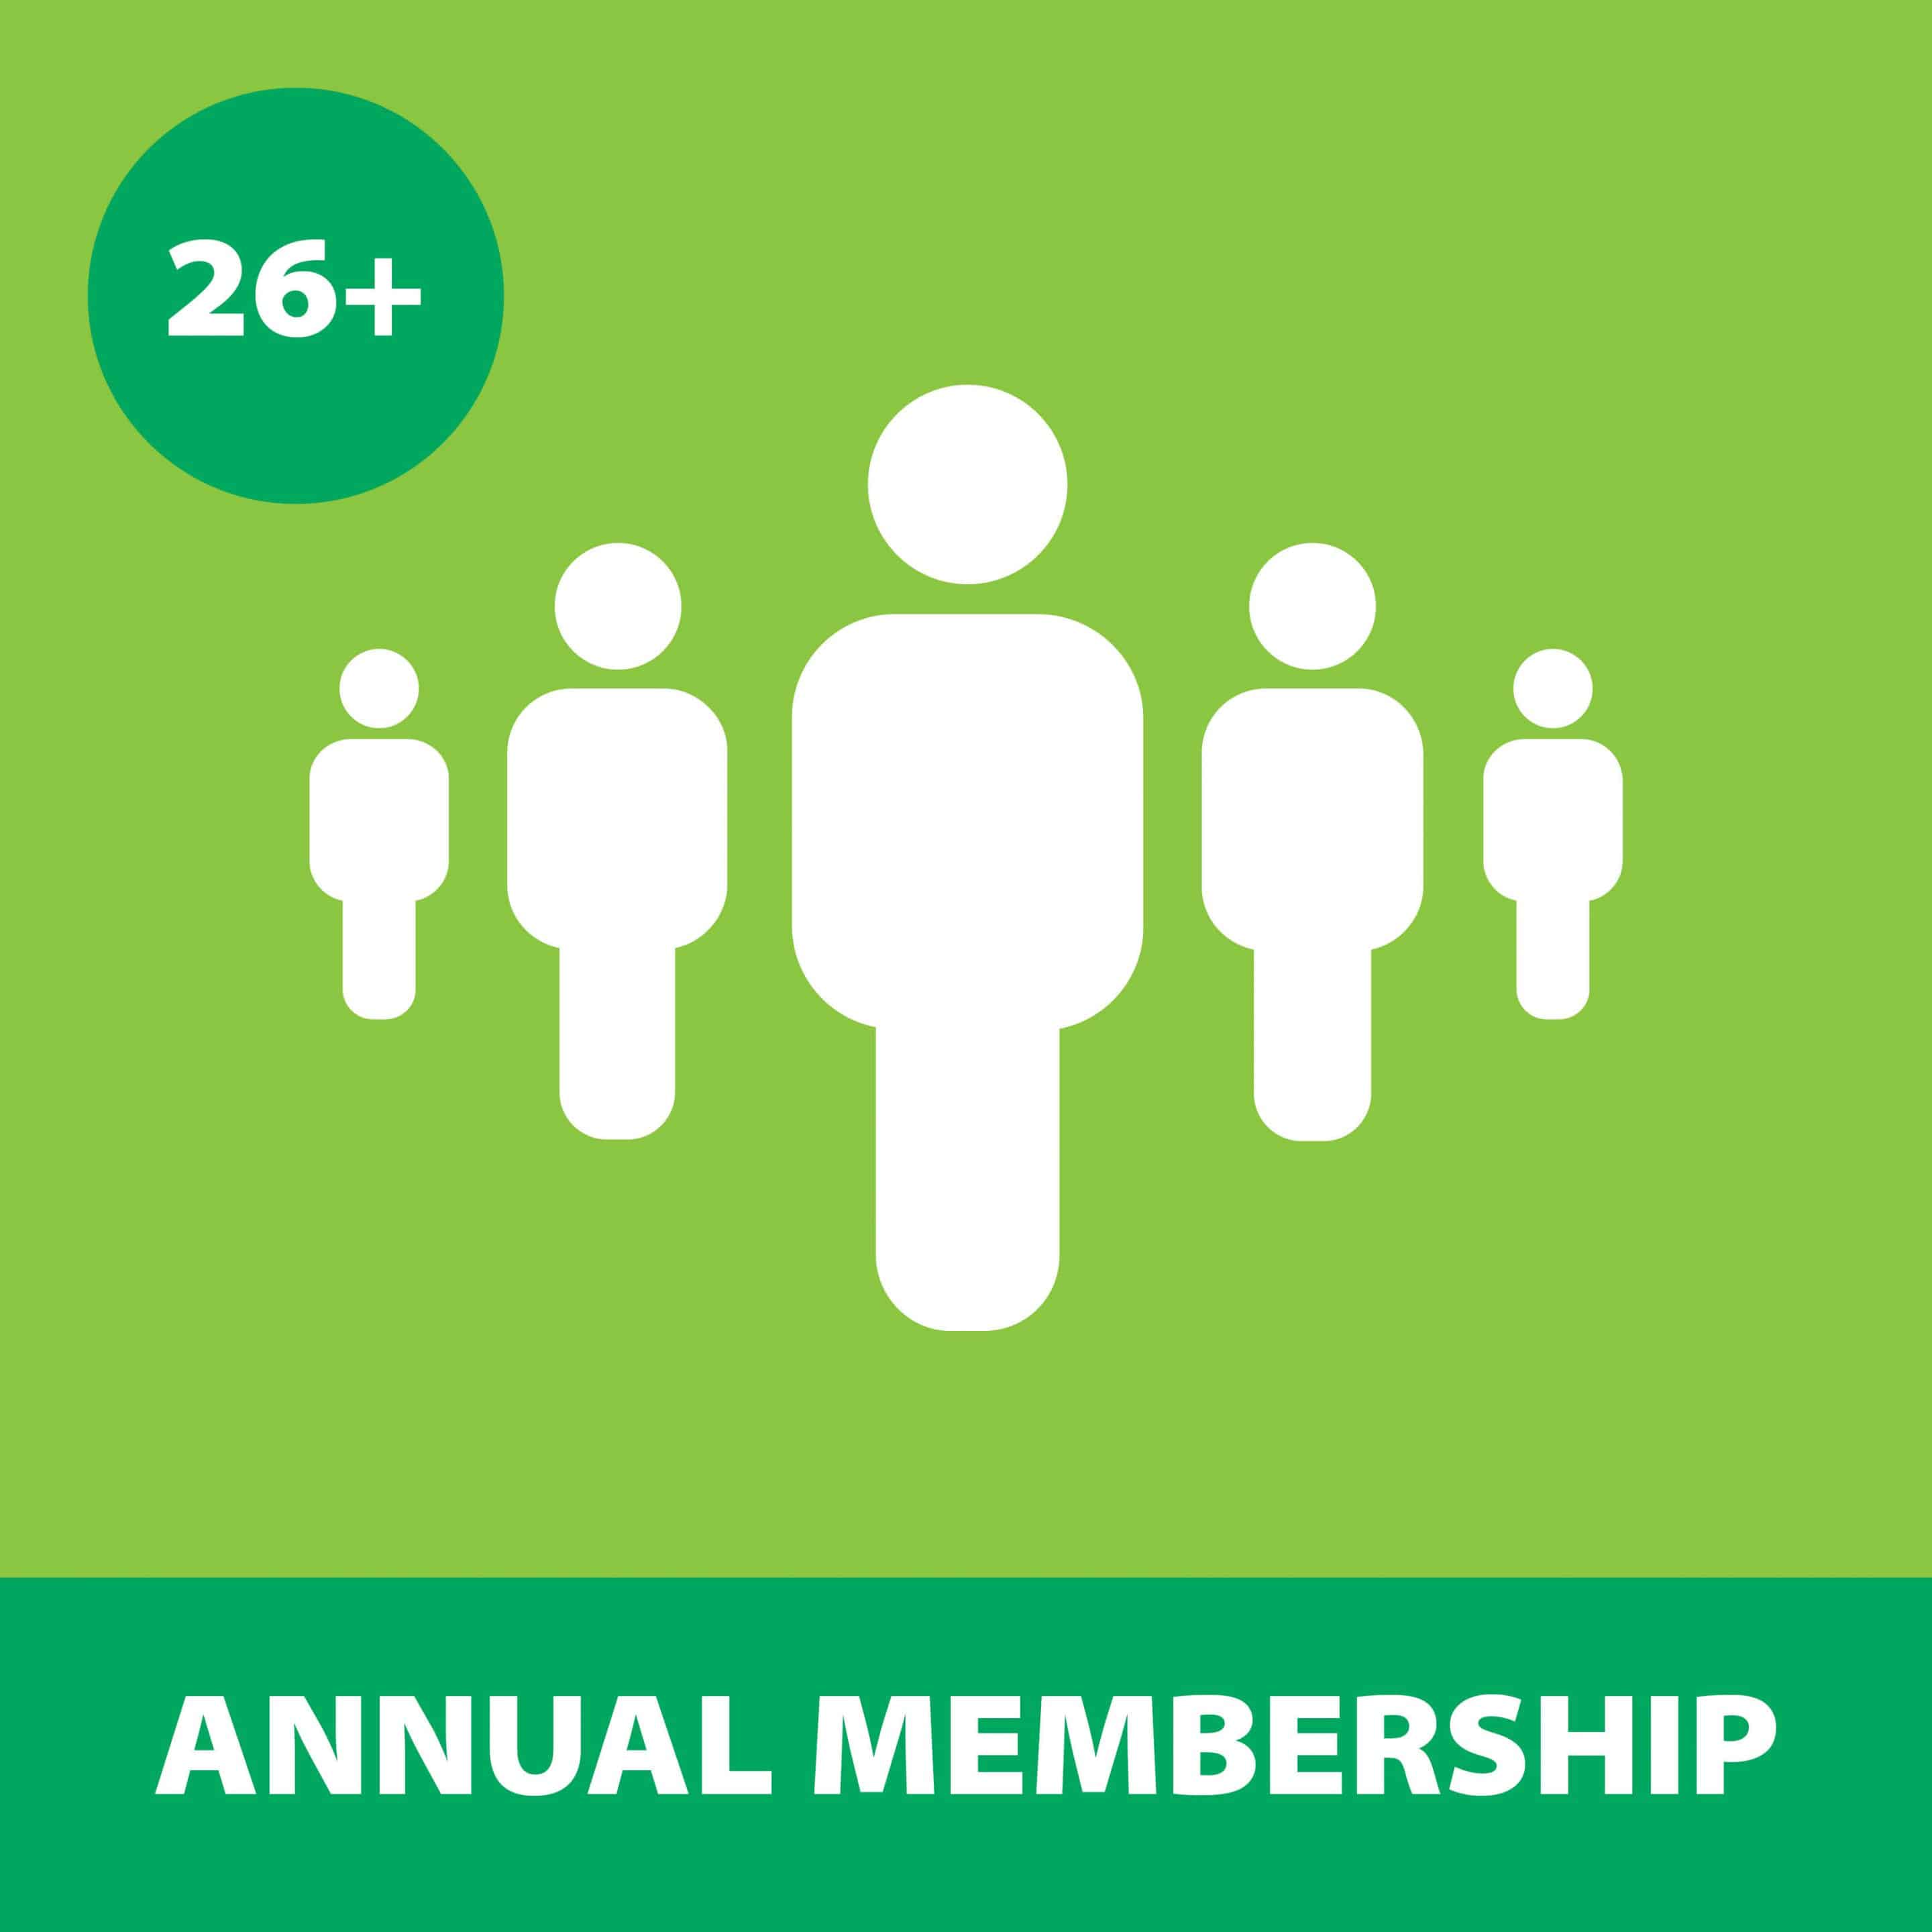 Corporate Membership (Businesses with 26+ Employees – Annual)